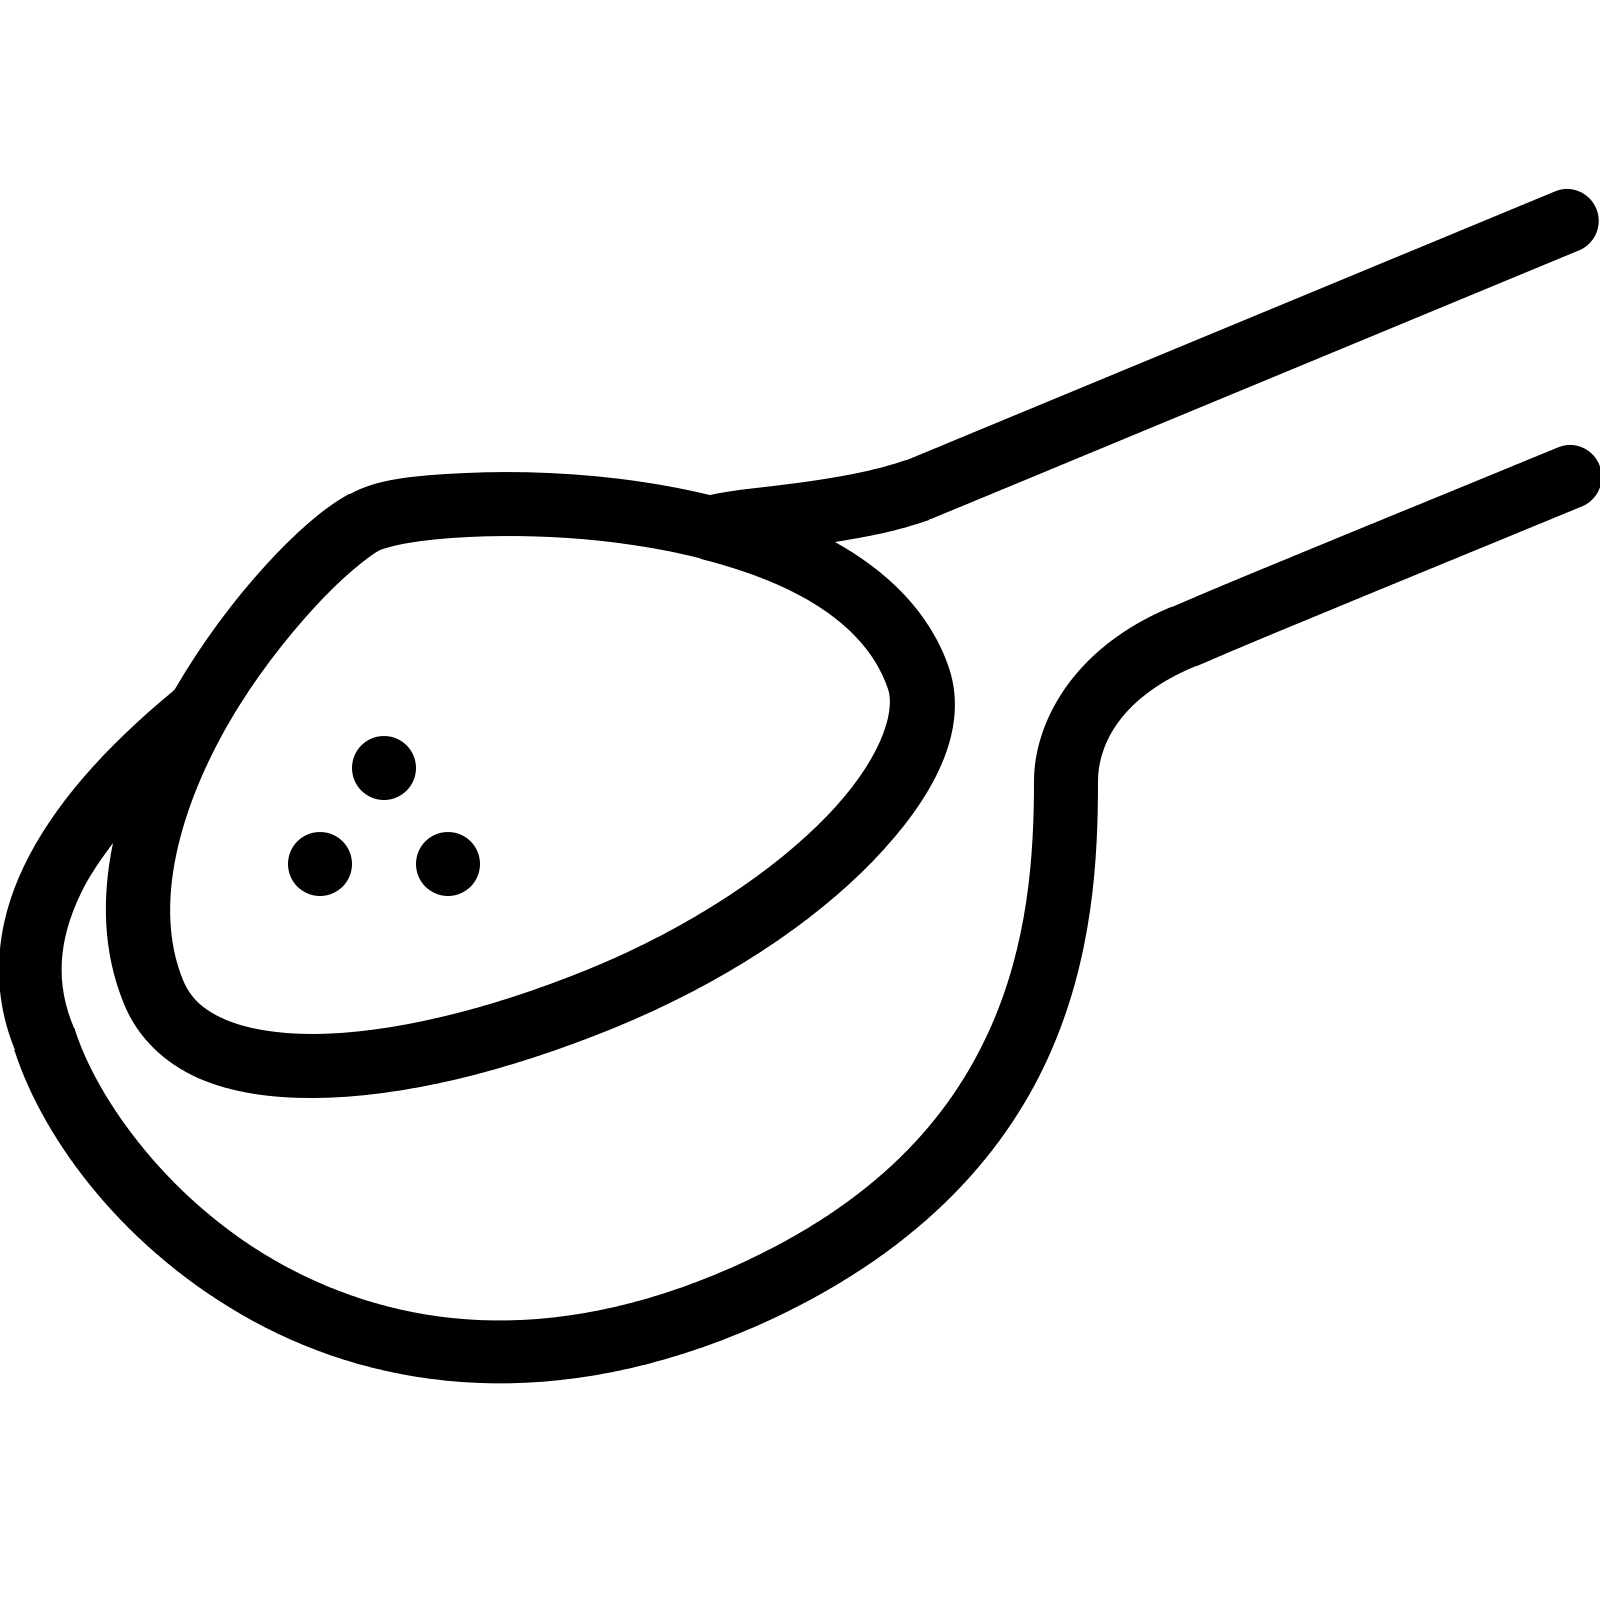 Spoon clipart free.